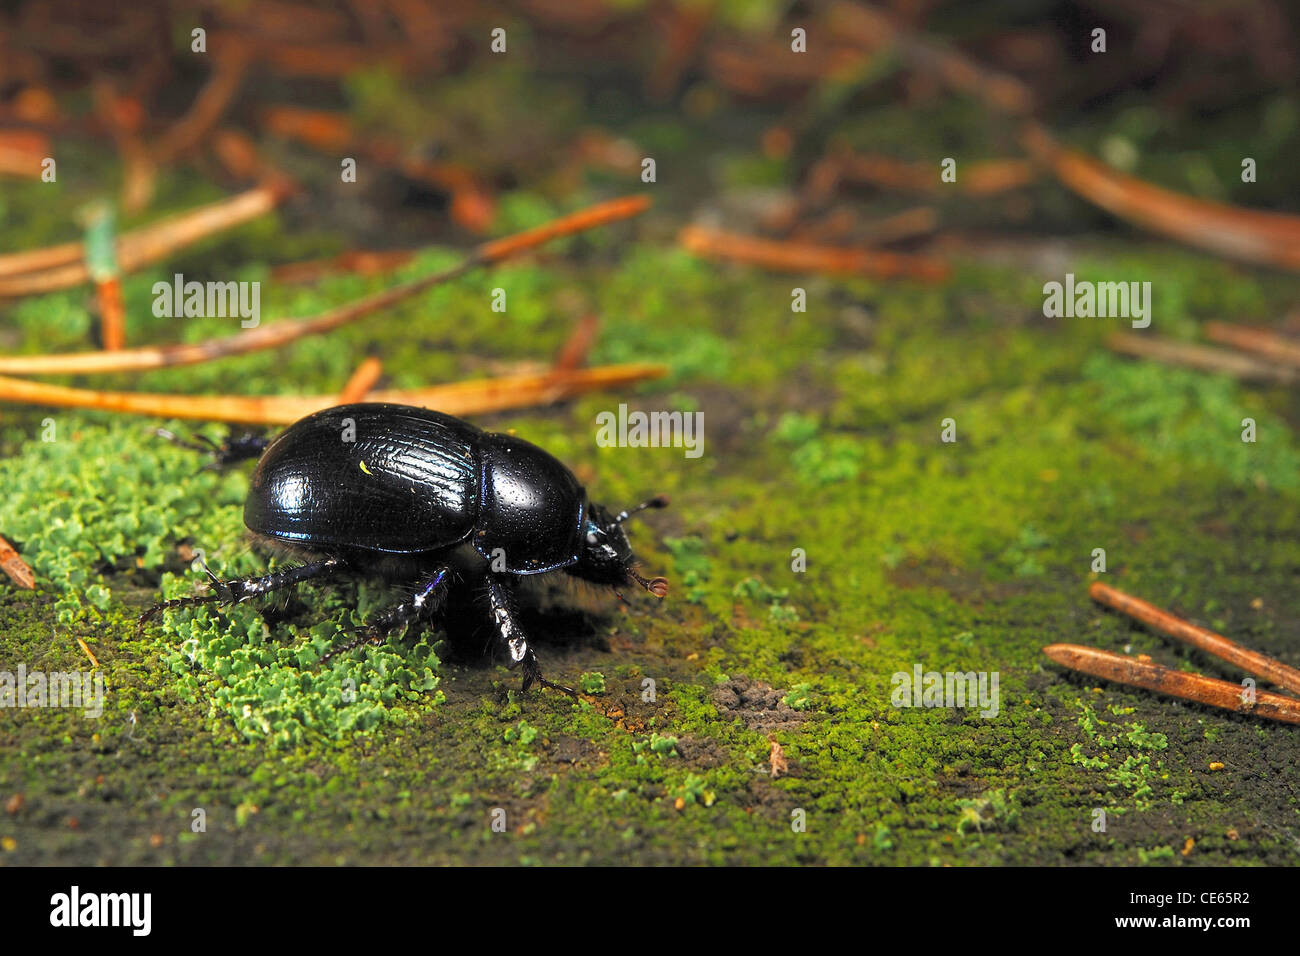 Forest dung beetle (Geotrupes stercorarius) passeggiate in foresta Foto Stock